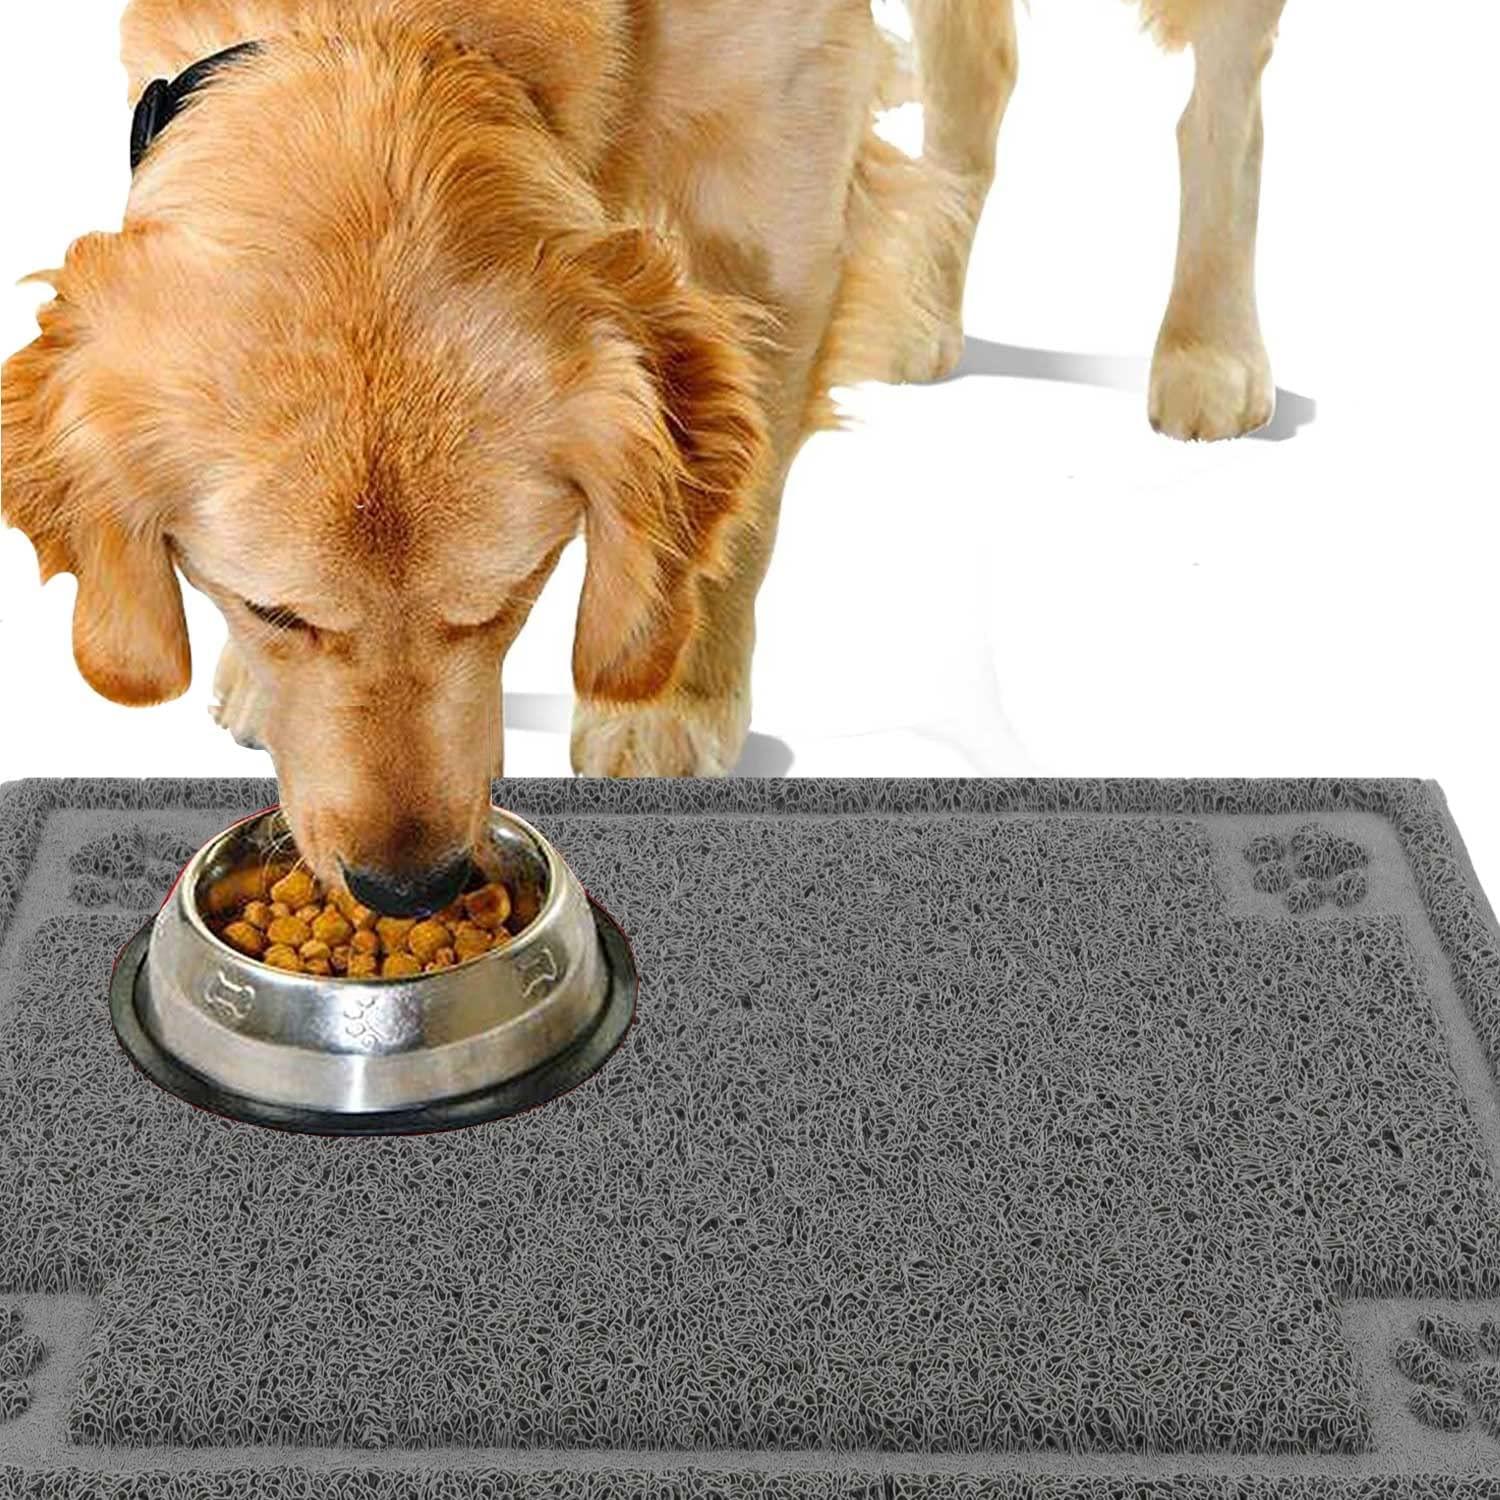 Urdogsl 24x36 Pet Feeding Mat for Dogs and Cats, Flexible Dog